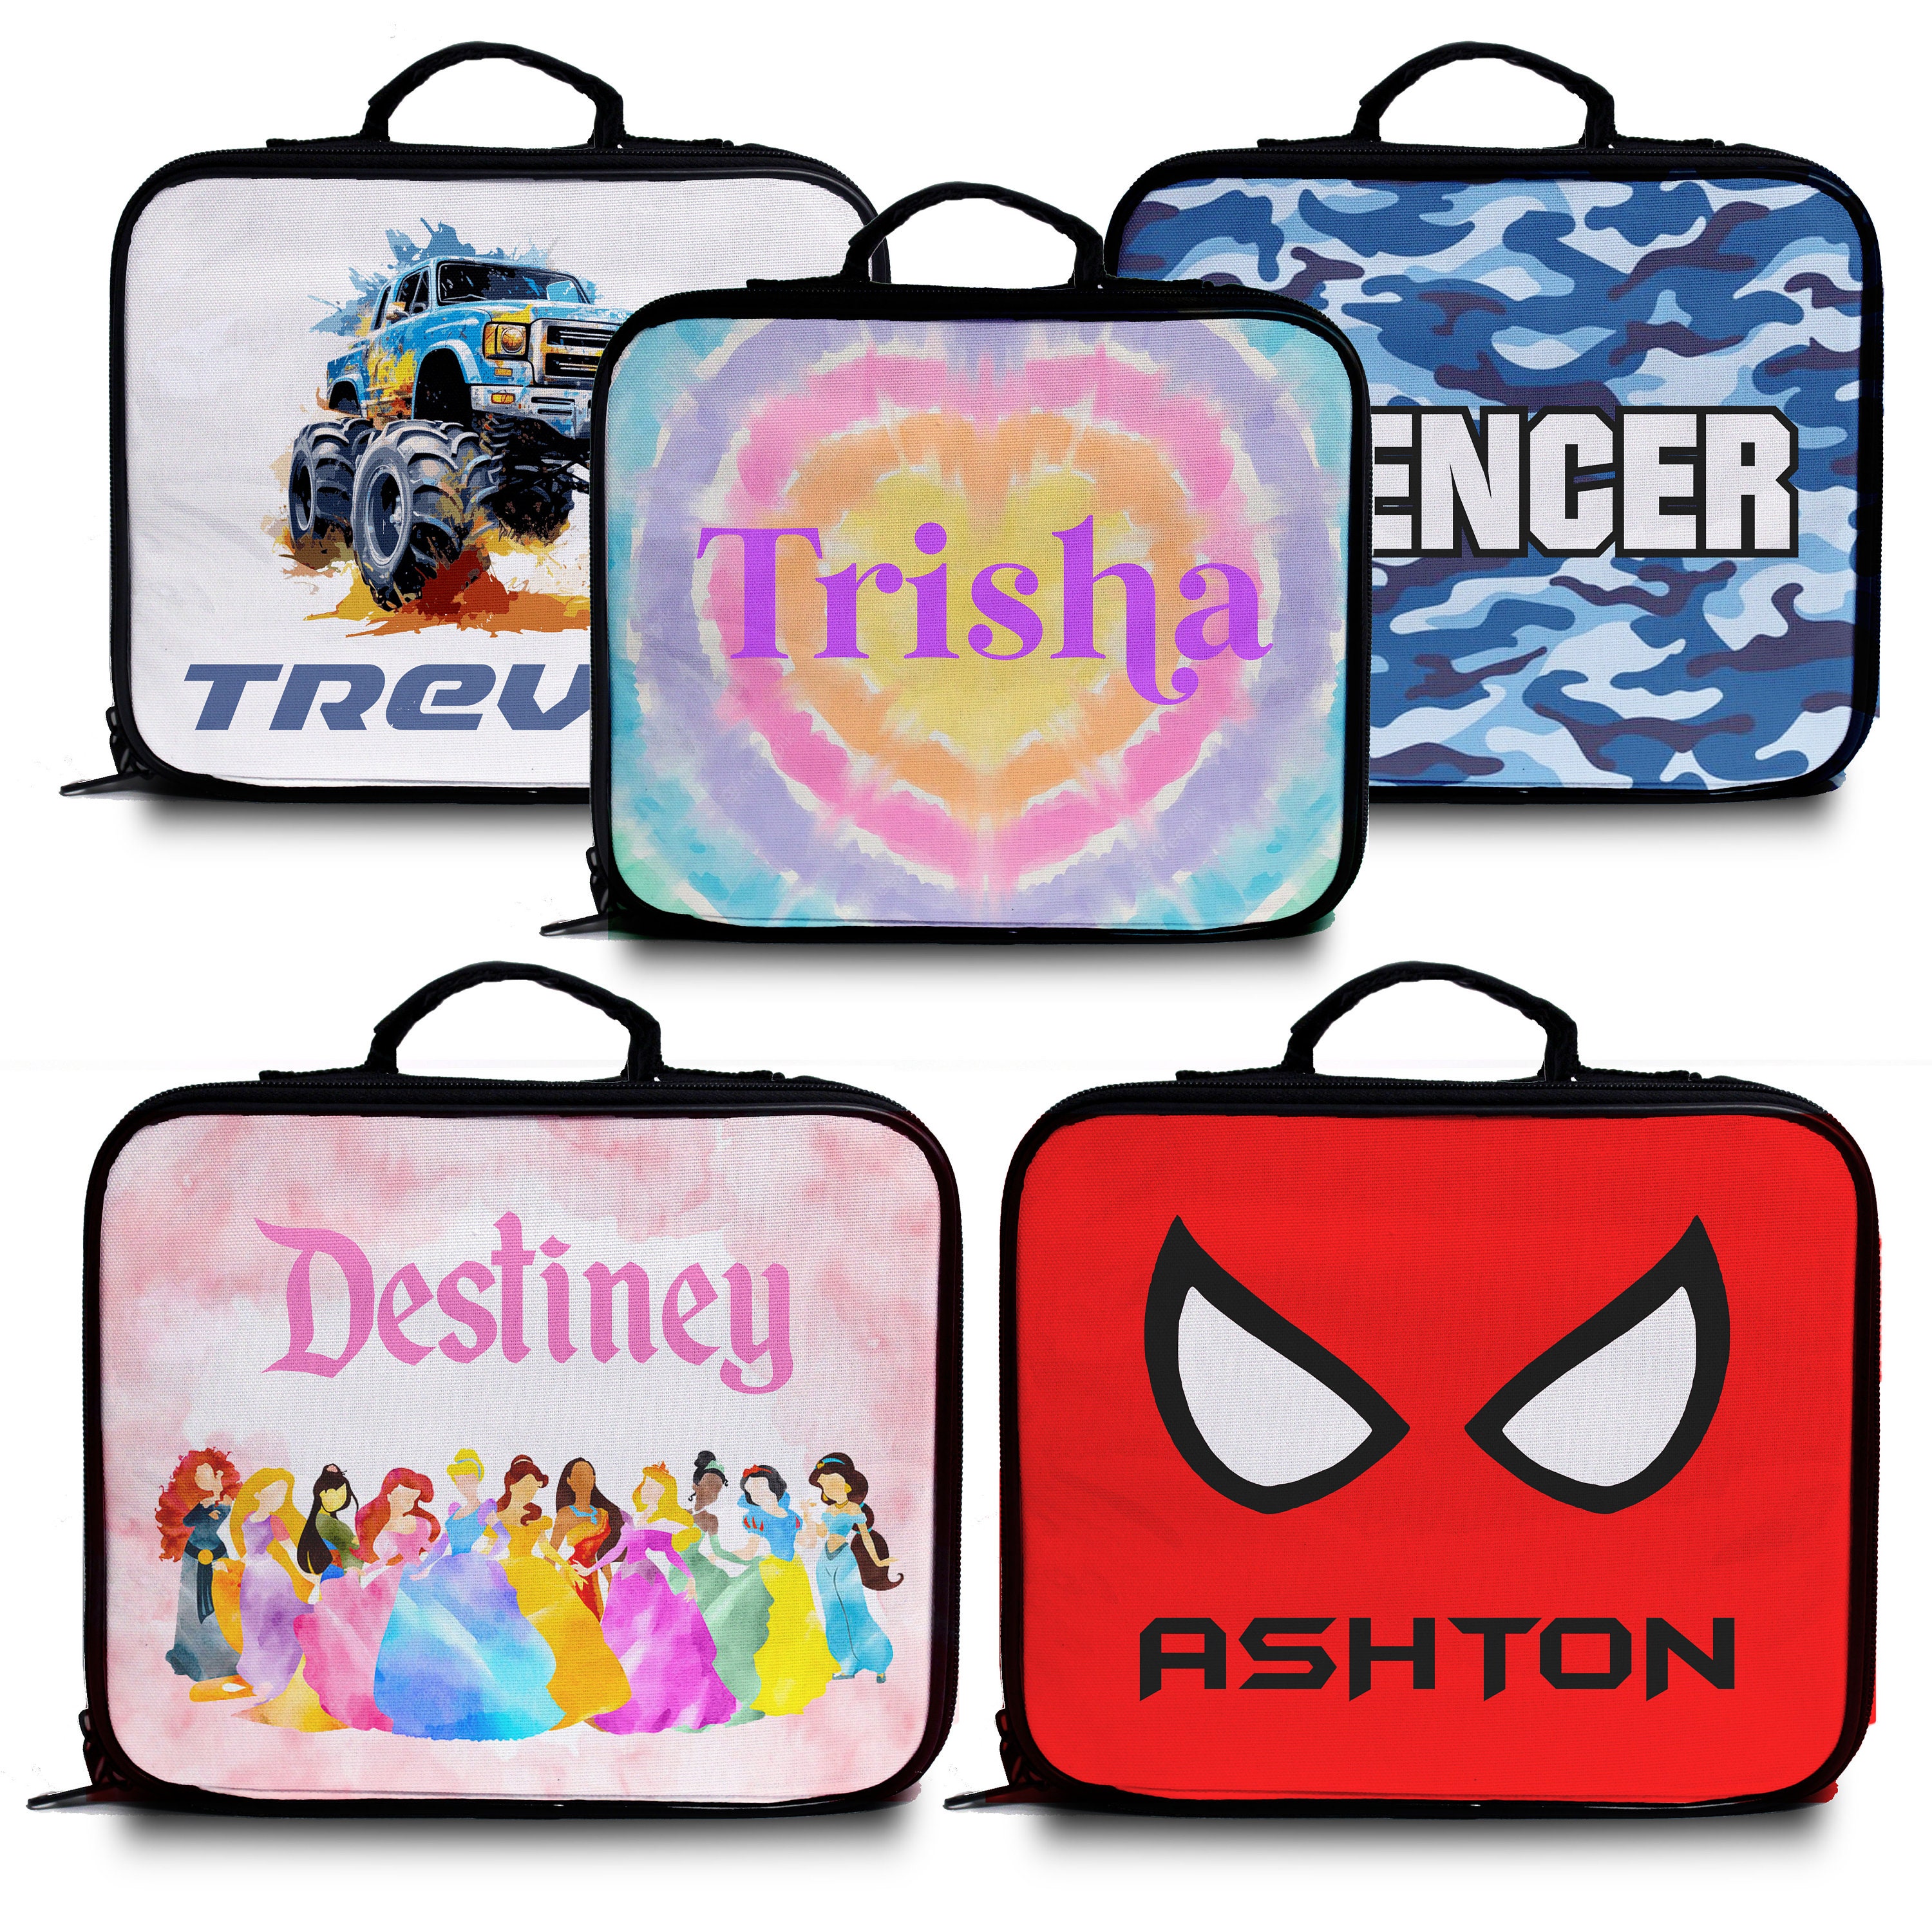 DIY Personalized Lunch Box for Kids School LOGO Children Name